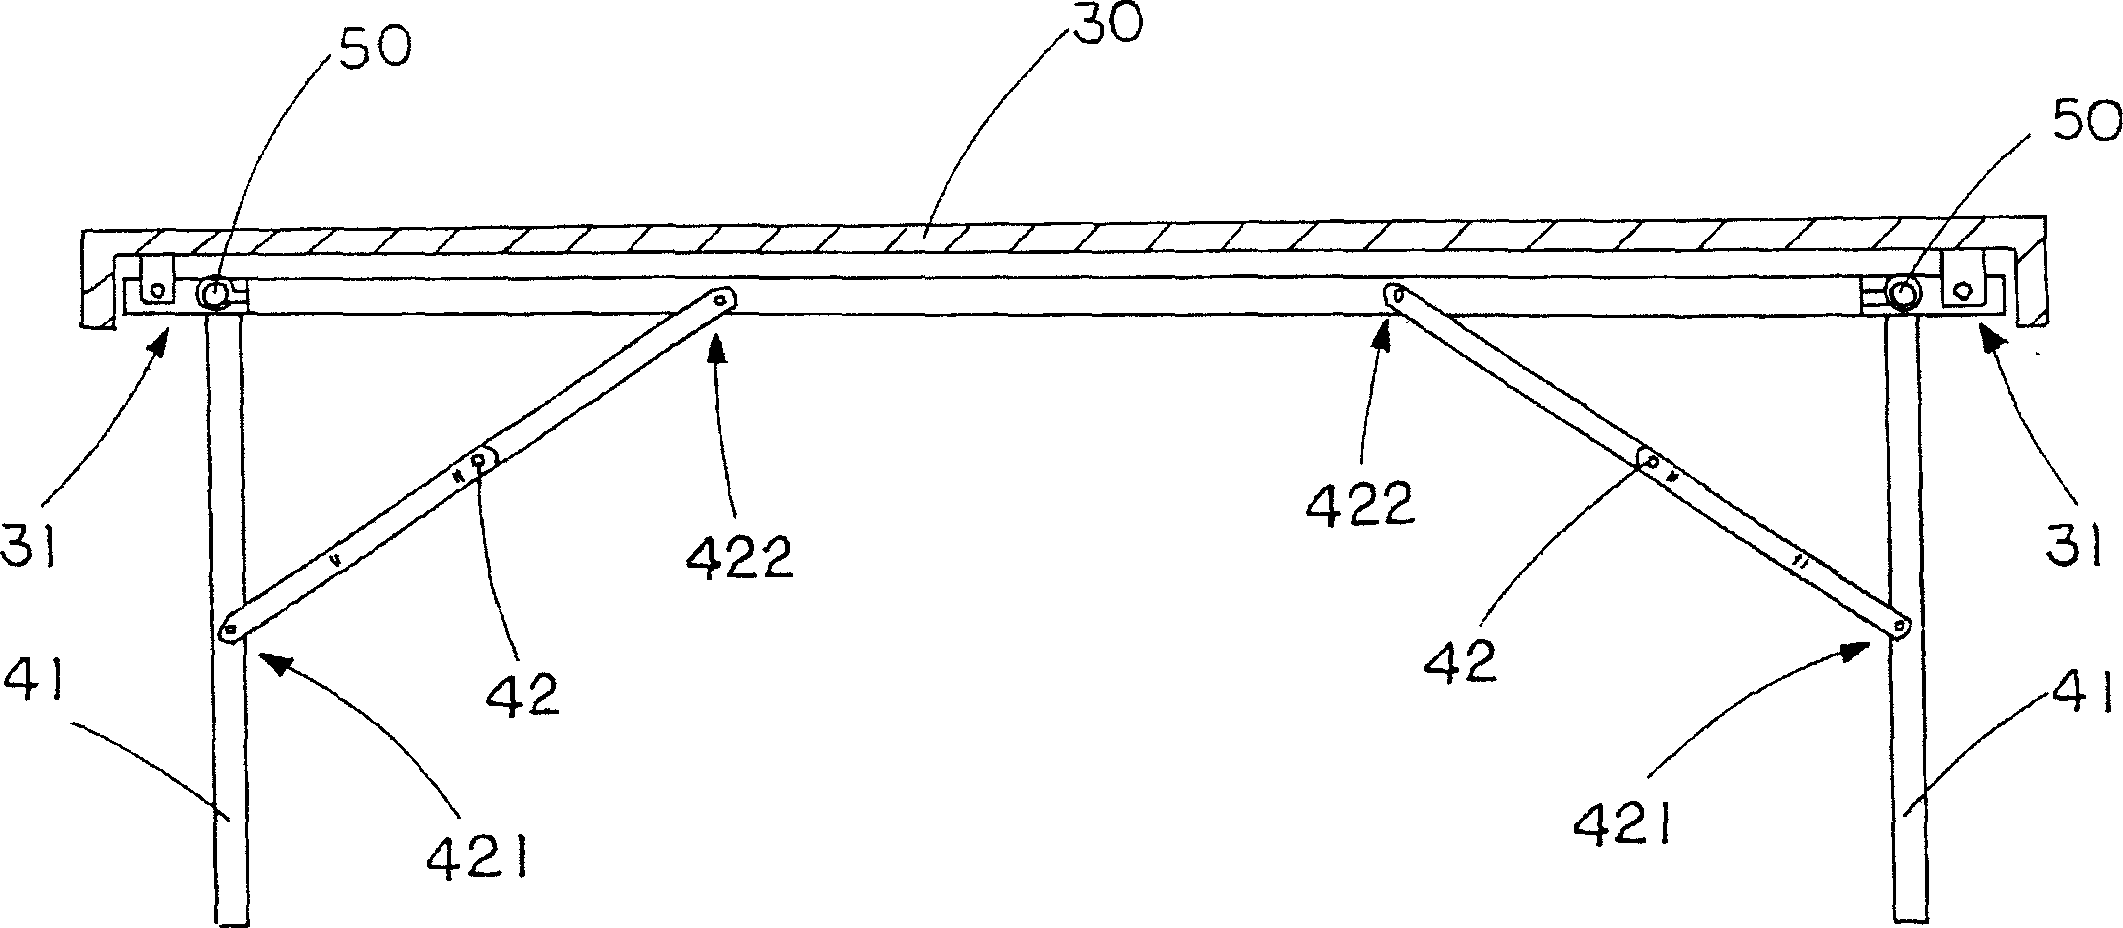 Foldable table with longitudinal mid-support arrangement